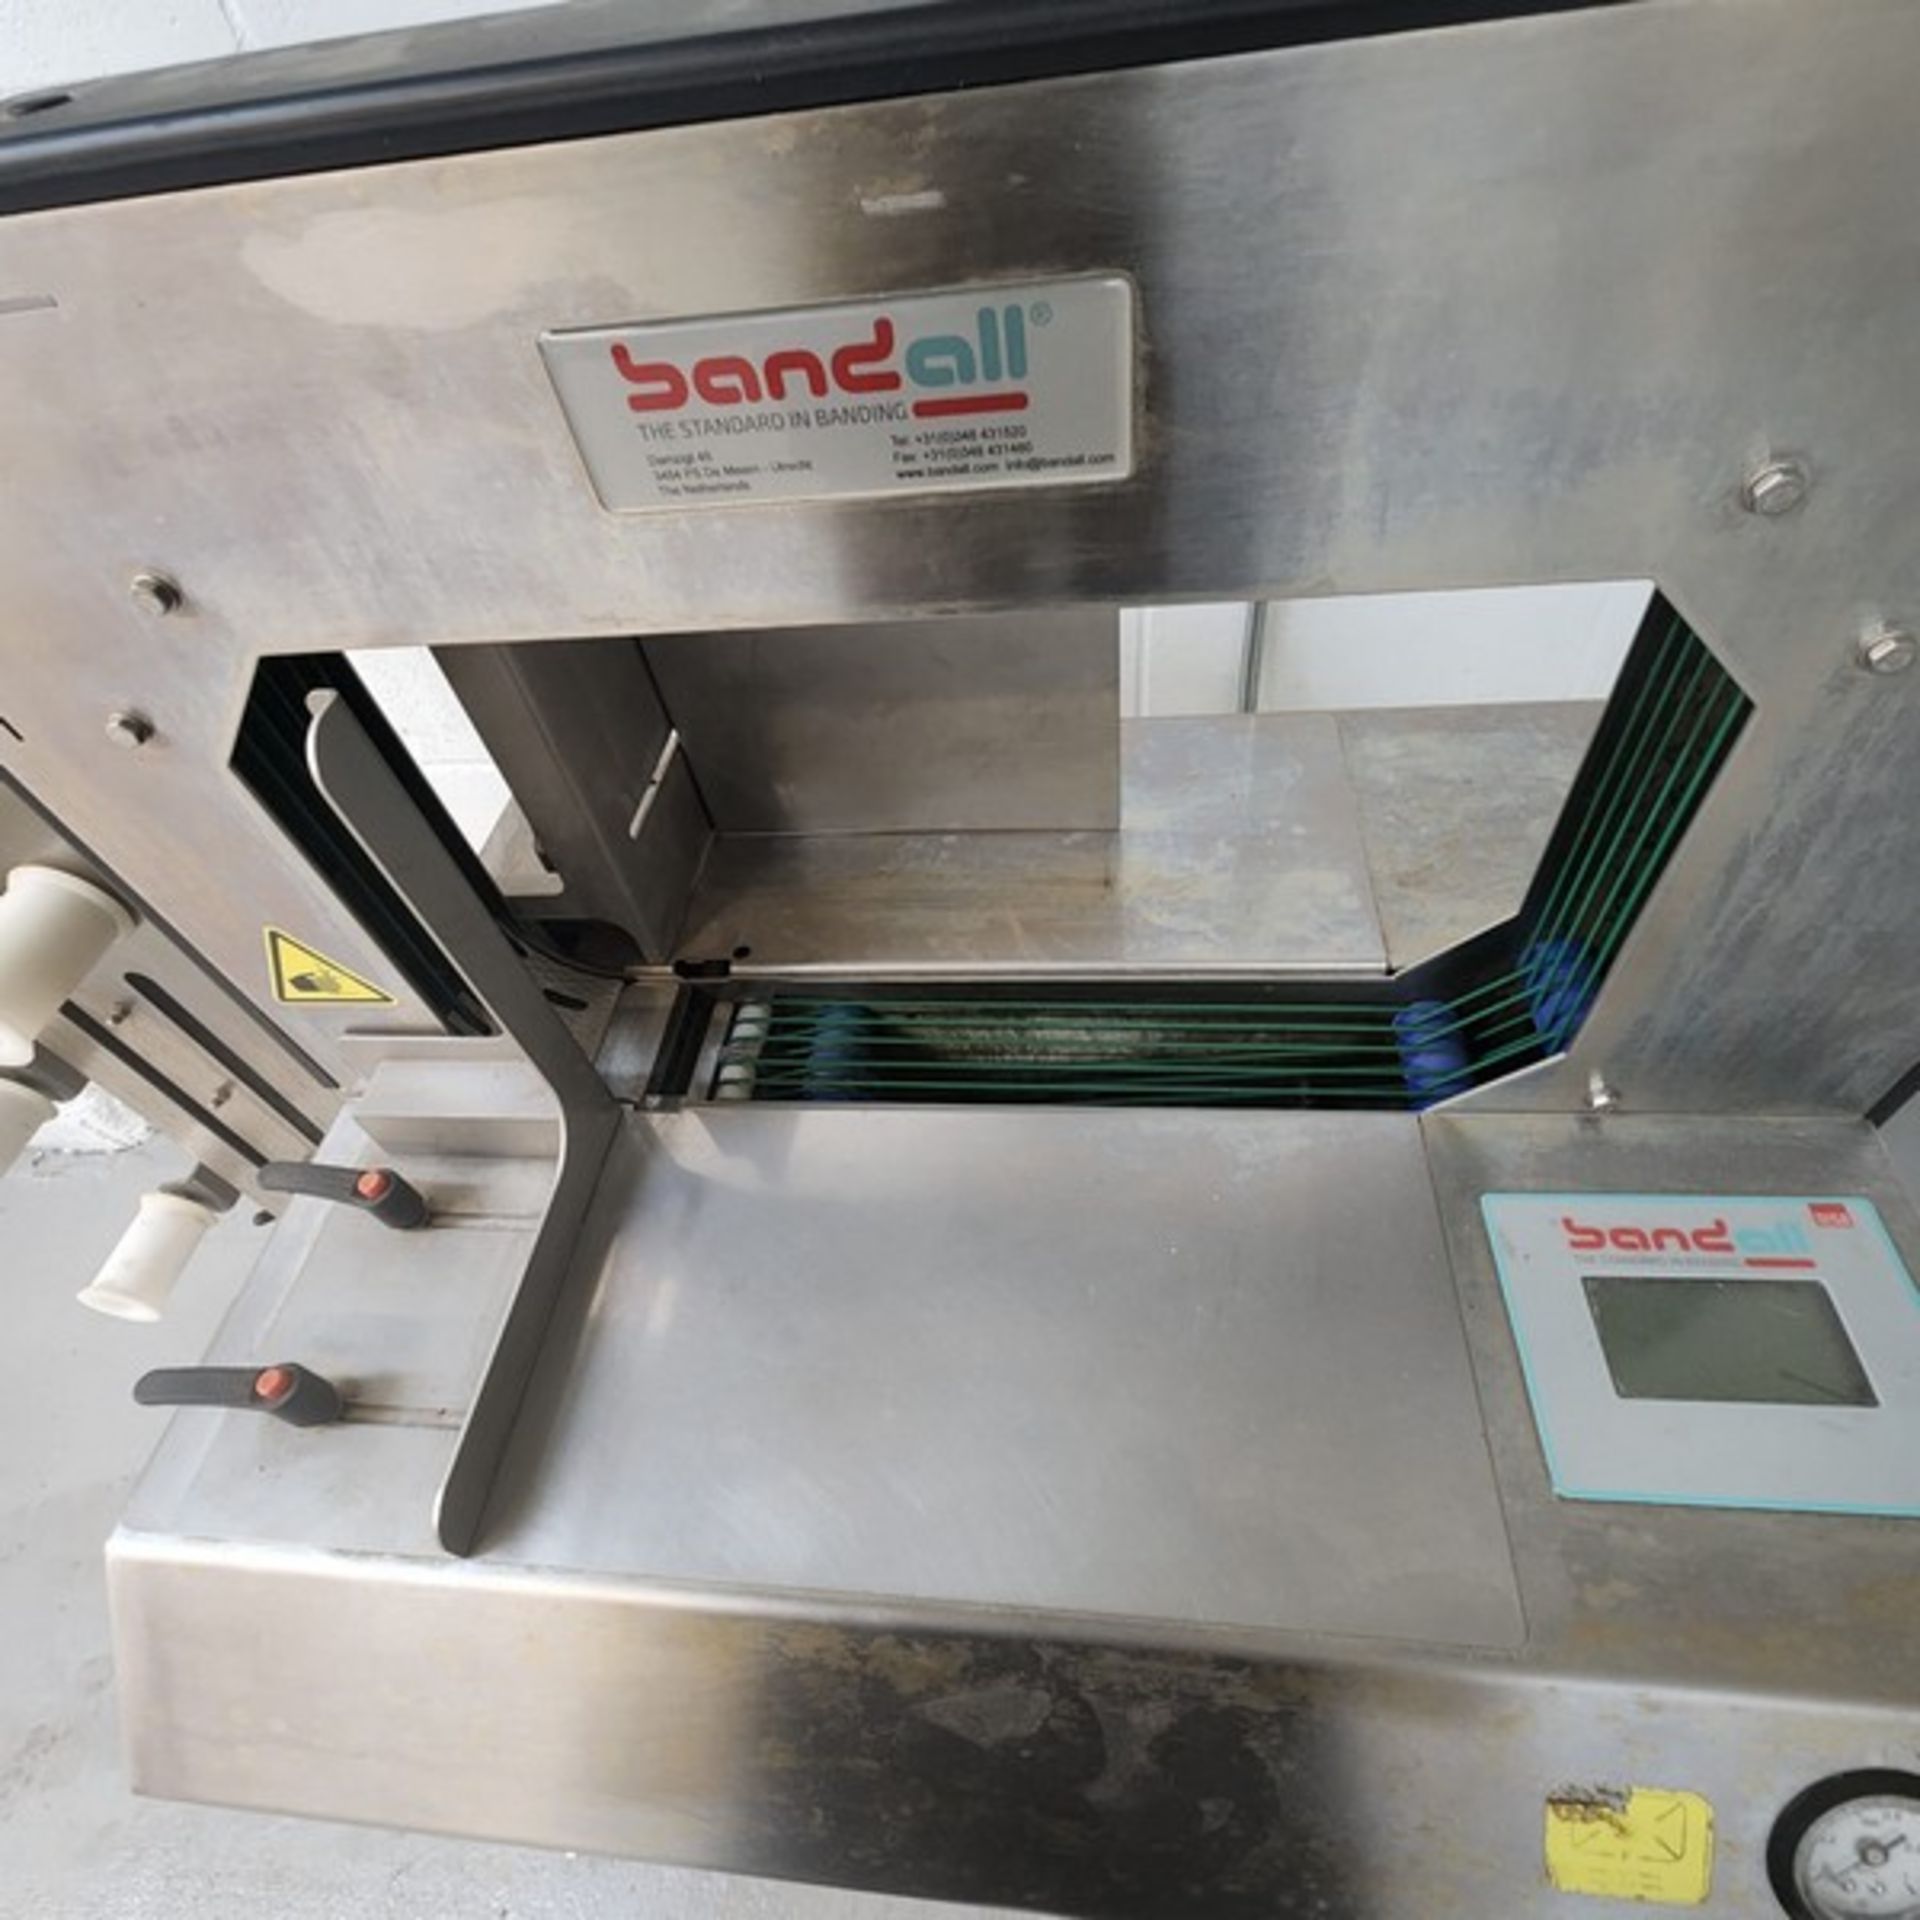 Semi-automatic Band all year 2018 bandind machine replacement cost $30k work in 120 volts 1 phase ( - Bild 4 aus 5